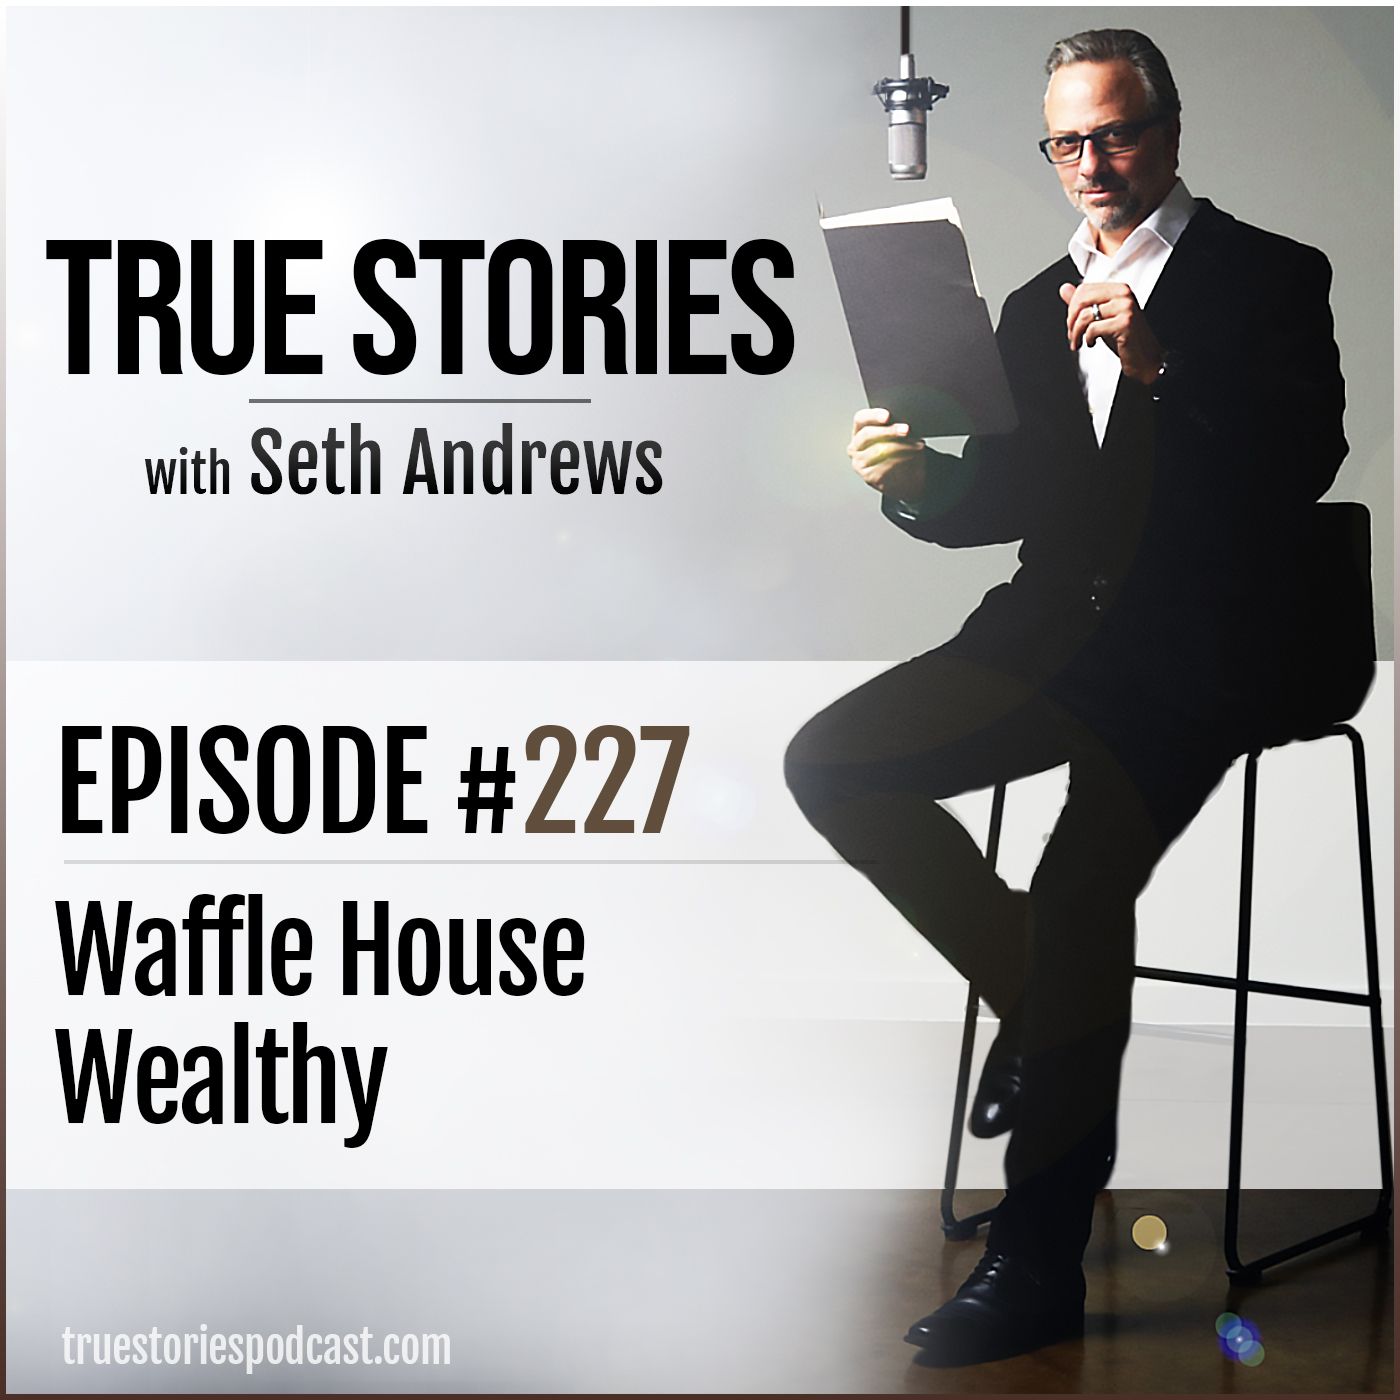 True Stories #227 - Waffle House Wealthy